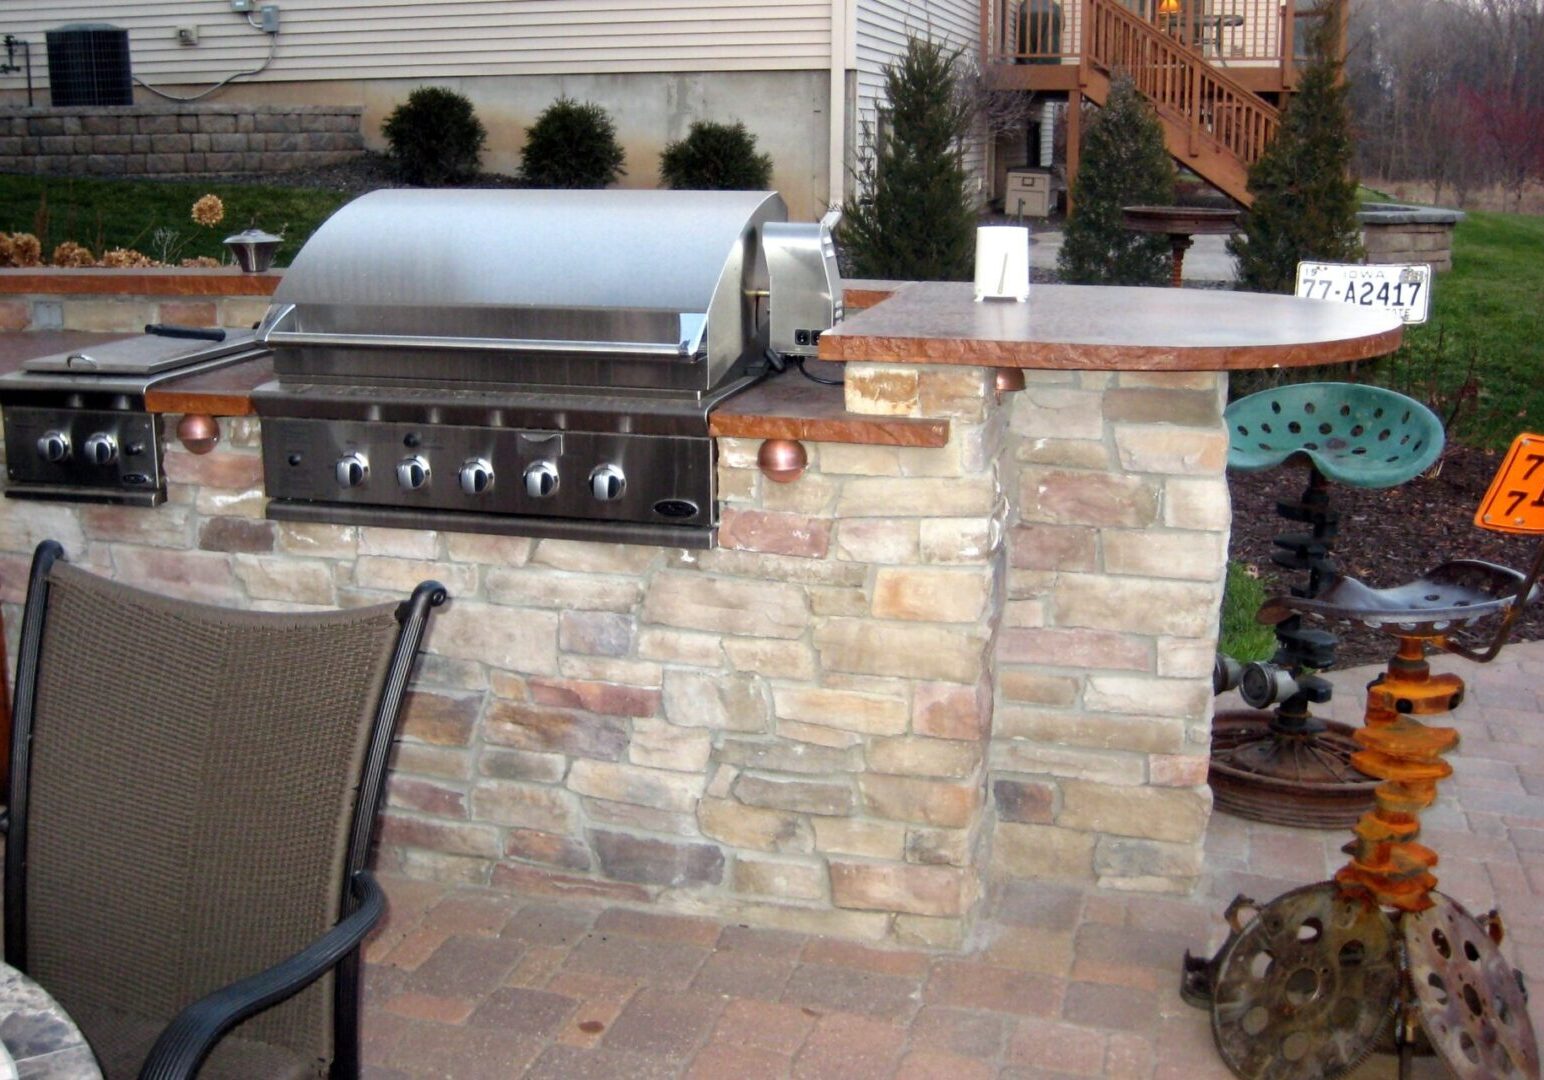 Outdoor grill on top of a brick counter with brown marble countertops